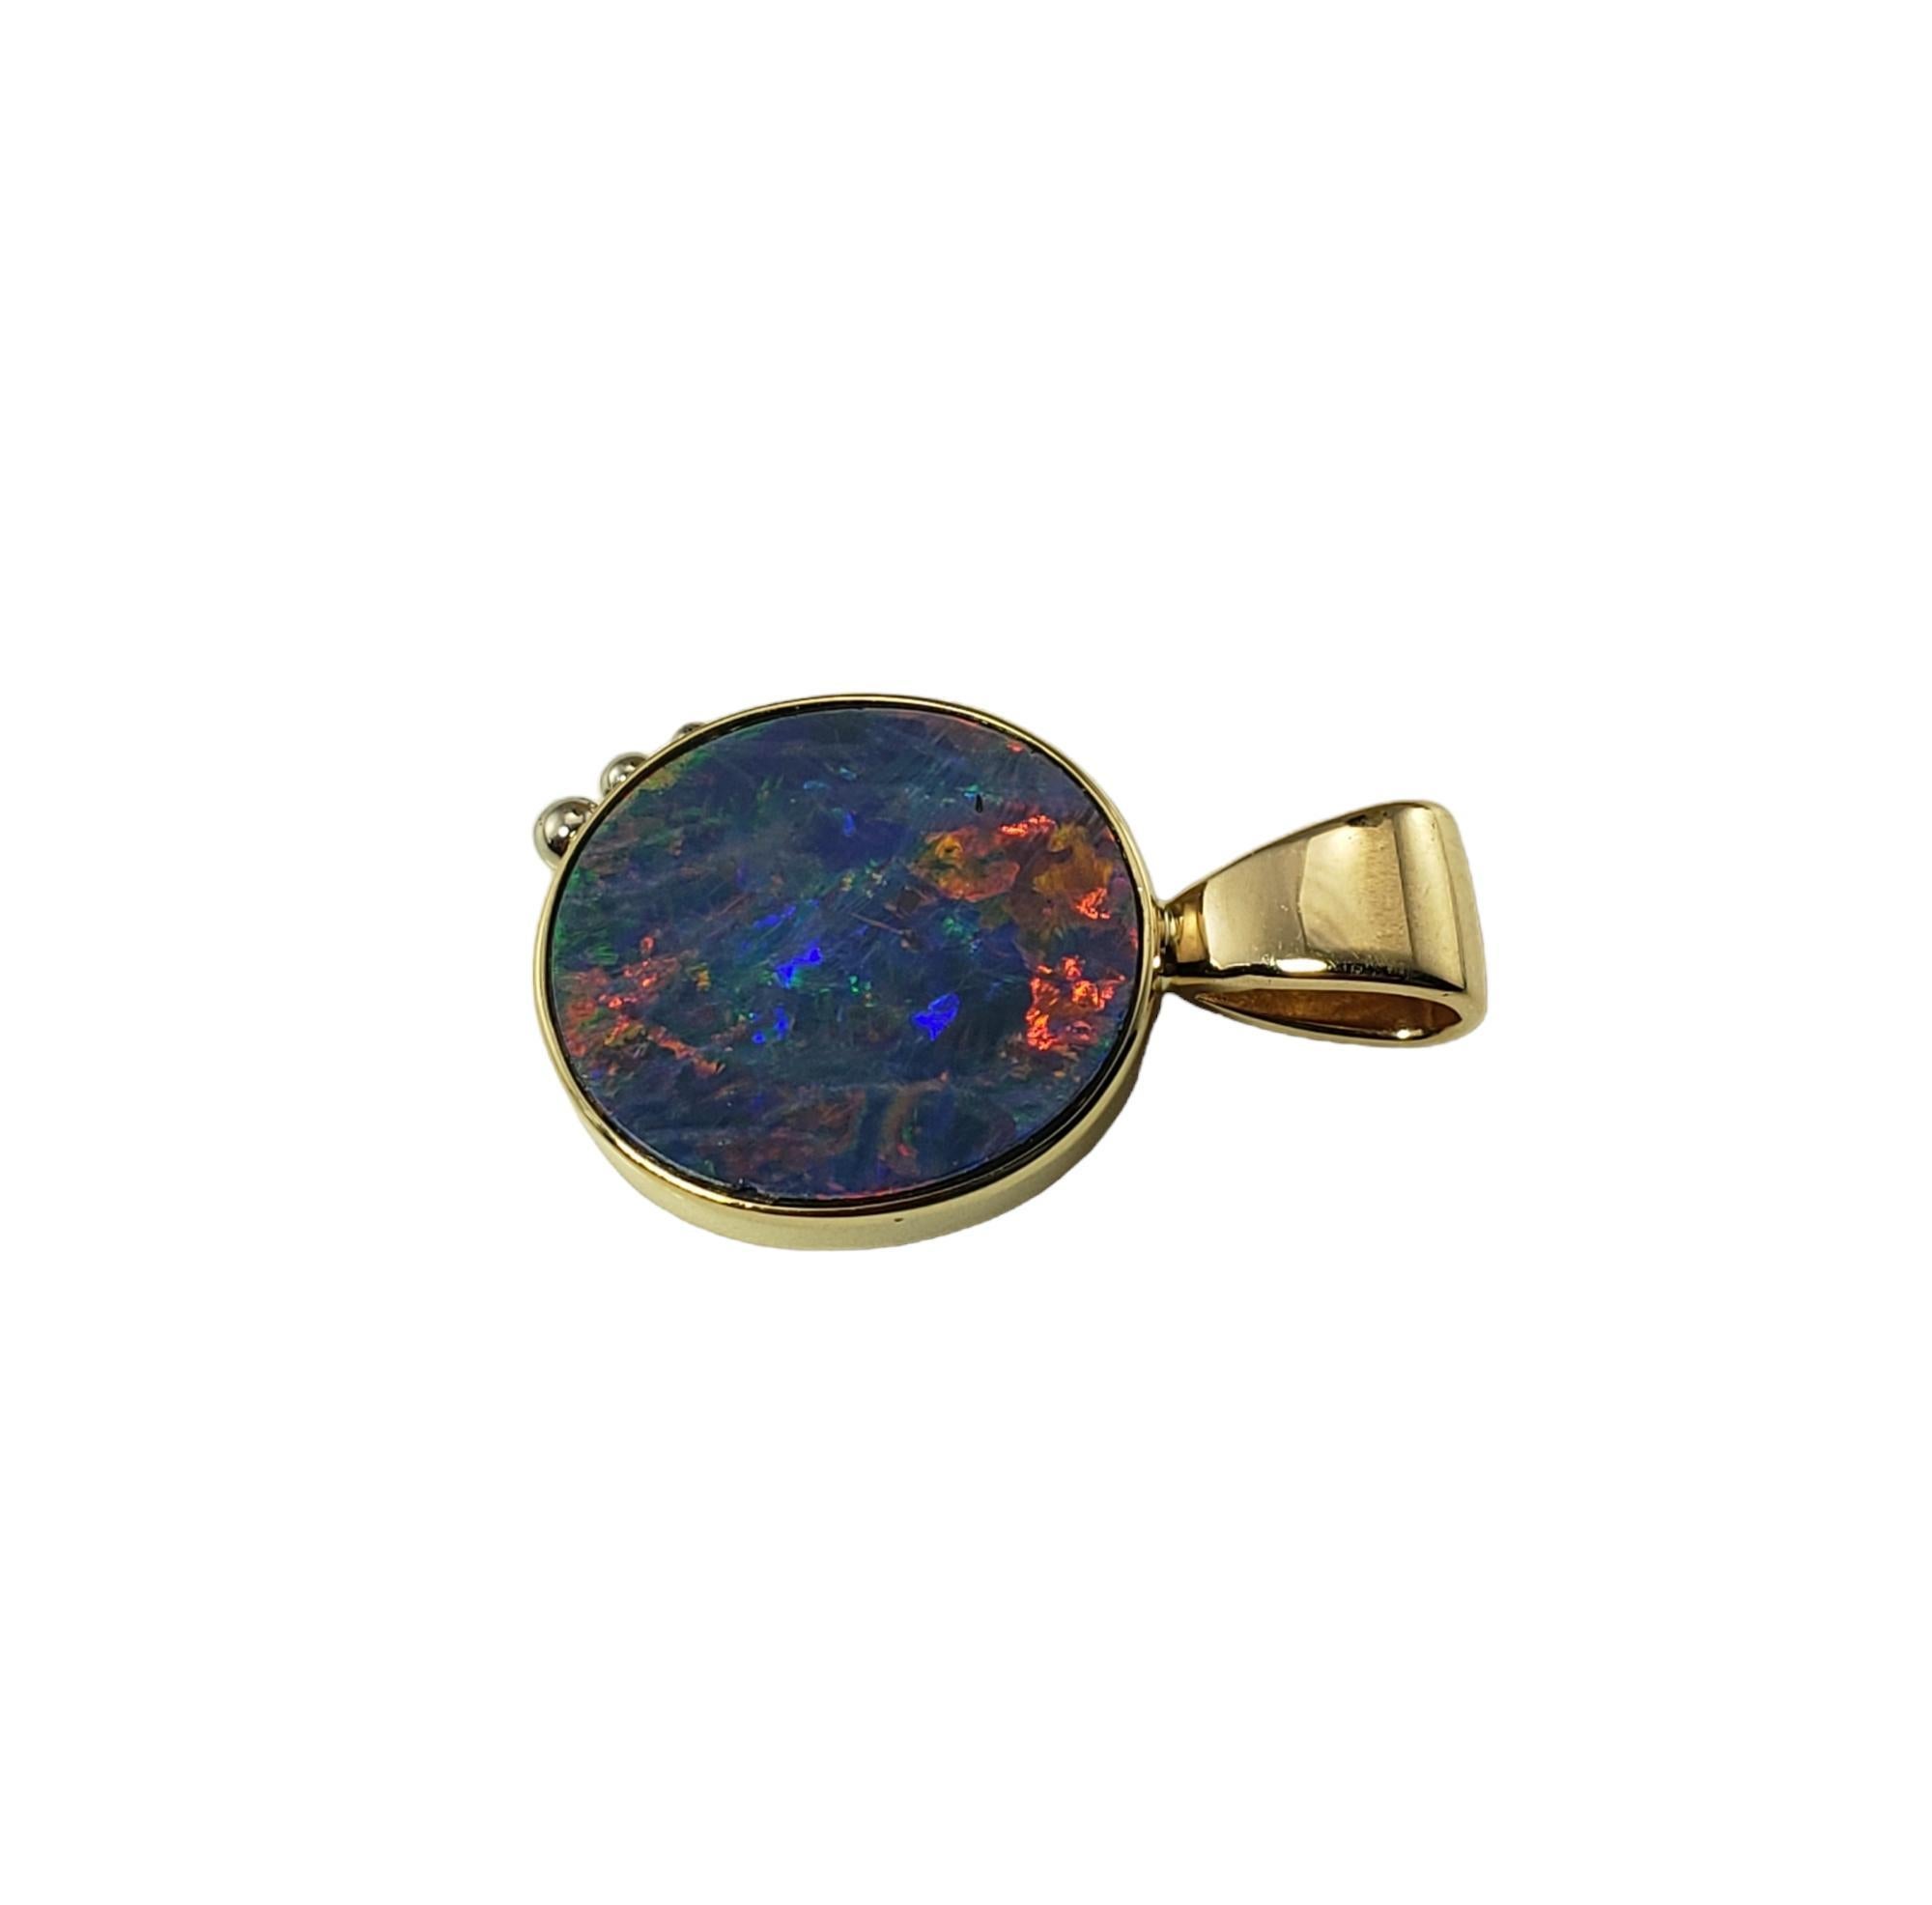 Vintage 14 Karat Yellow Gold and Opal Doublet Pendant JAGi Certified-

This elegant pendant features one oval black opal doublet (16.3 mm x 14.4 mm) set in classic 14K yellow gold.

Size: 26.4 mm x 16.5 mm

Stamped: 14KT

Weight: 4.1 gr./ 2.6